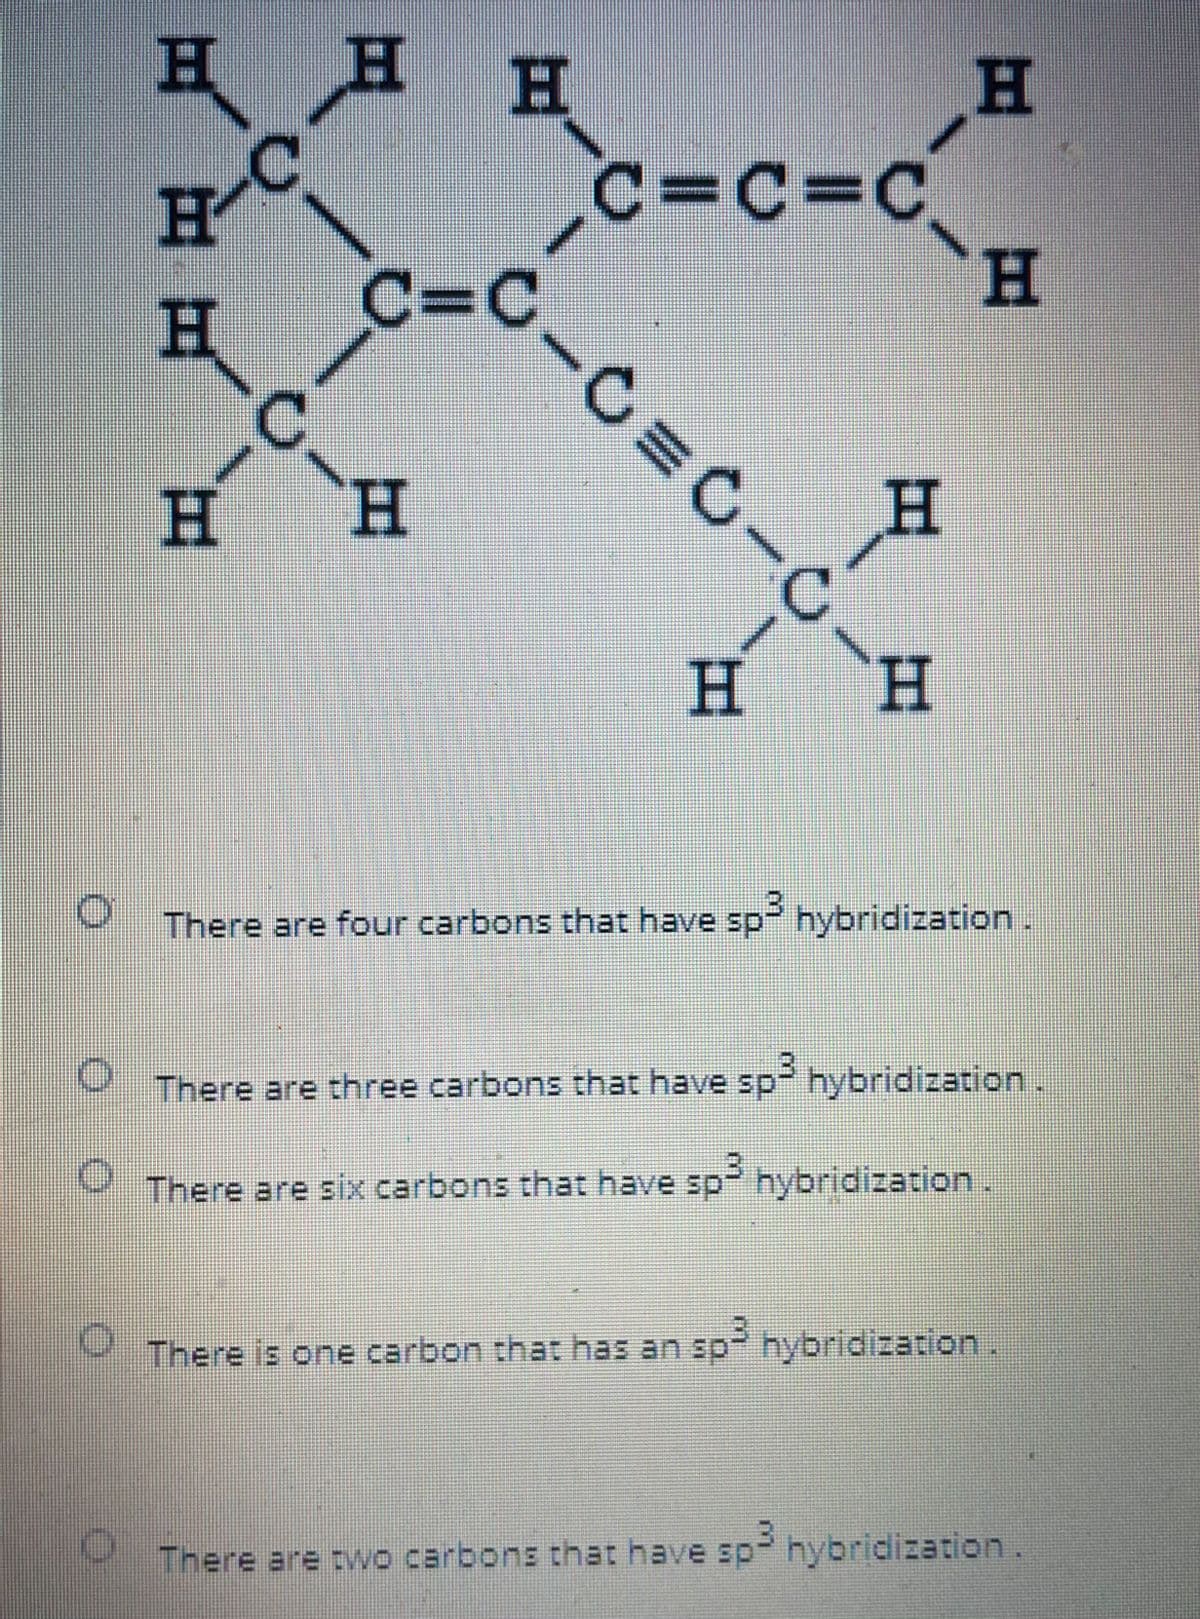 H H
H
C=c=c
C=C
C.
C.
H
H,
H
H.
H.
H.
H
There are four carbons that have sp hybridization.
There are three carbons that have sp hybridization
There are six carbons that have sp hybridization.
V There is one carbon that has an sp hybridization.
There are two carbons that have sp-
hybridization.
%3D
